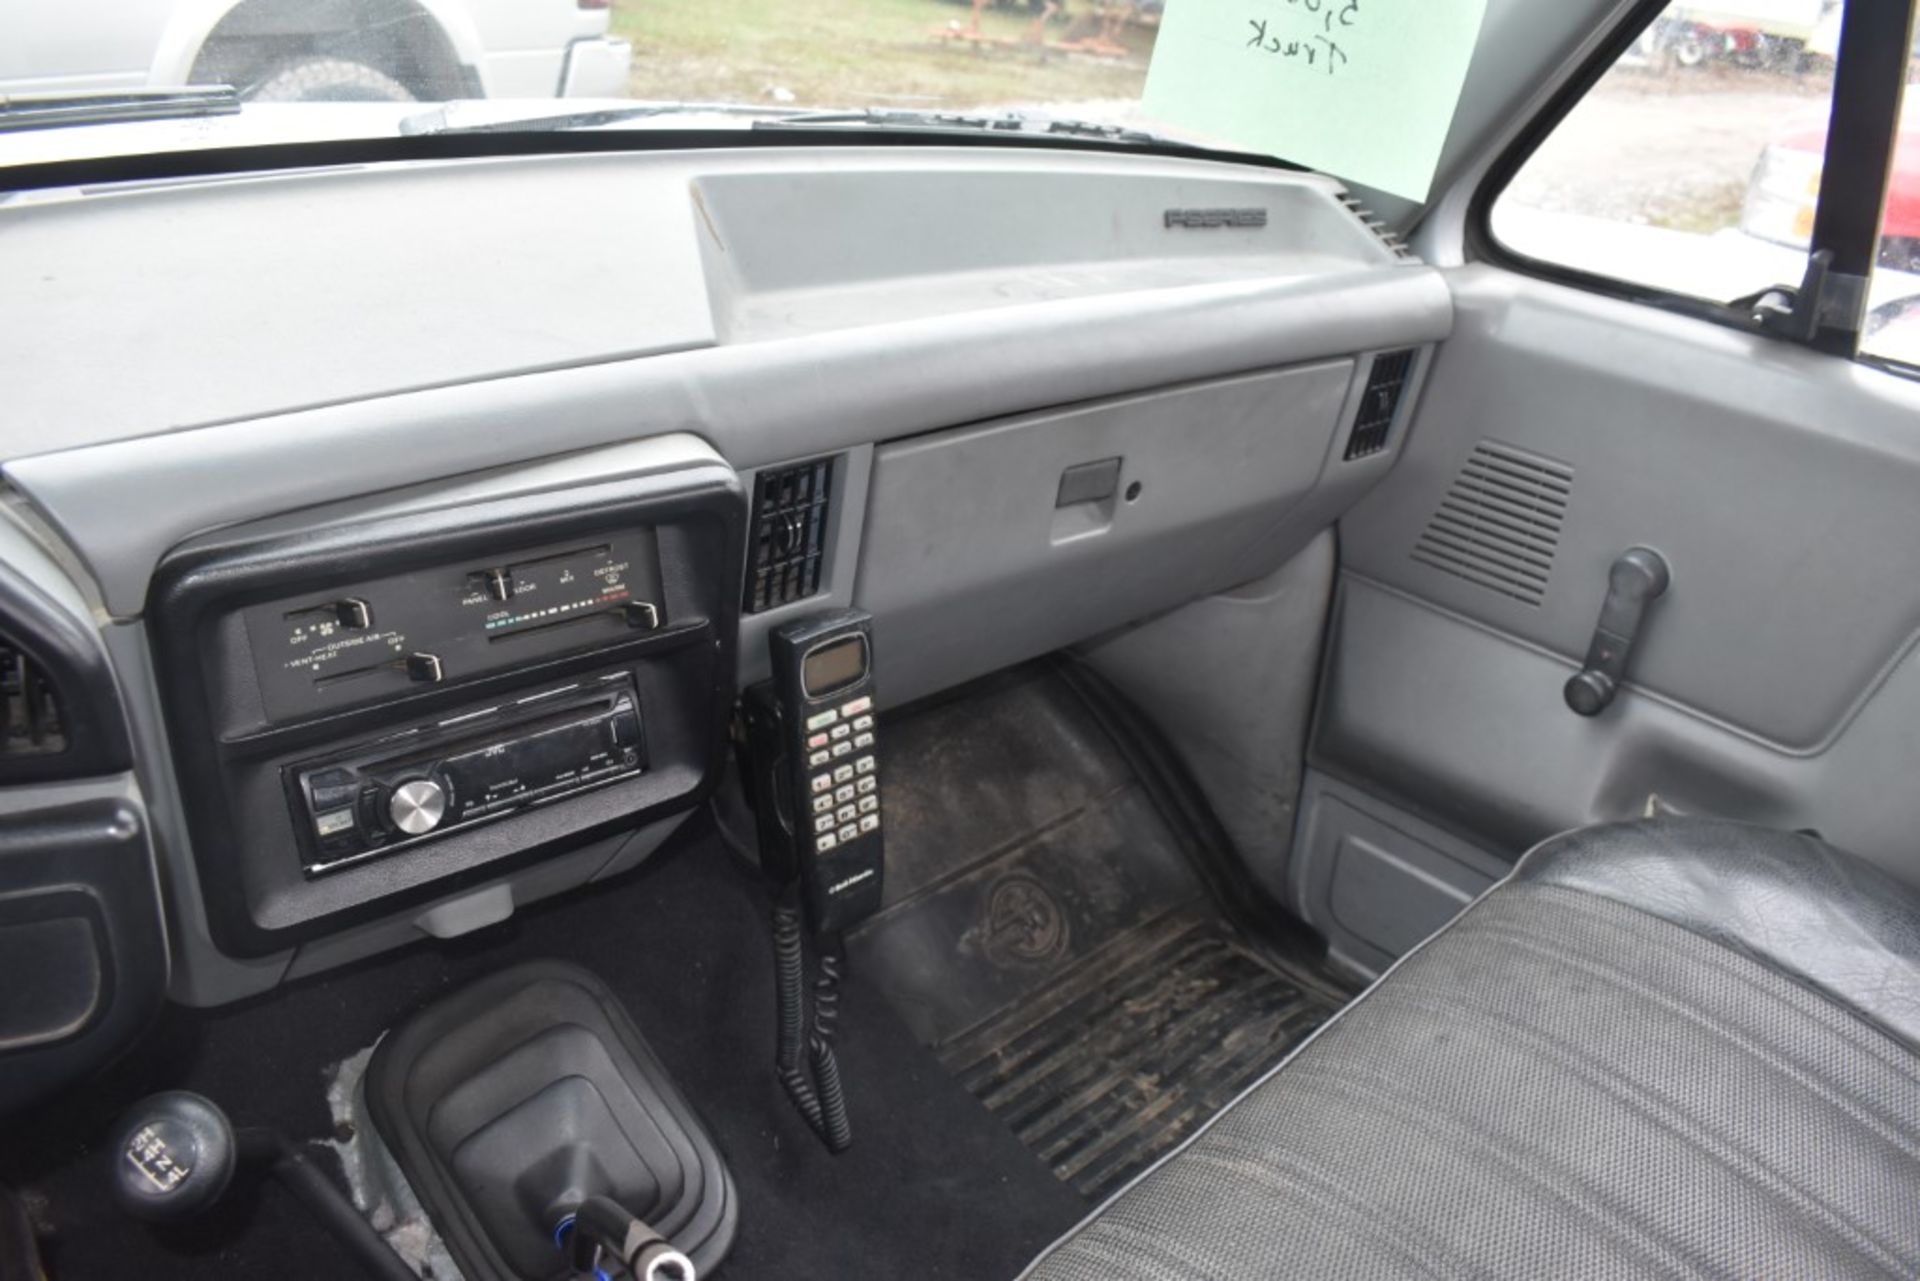 1987 Ford F-150 Truck - Image 34 of 36